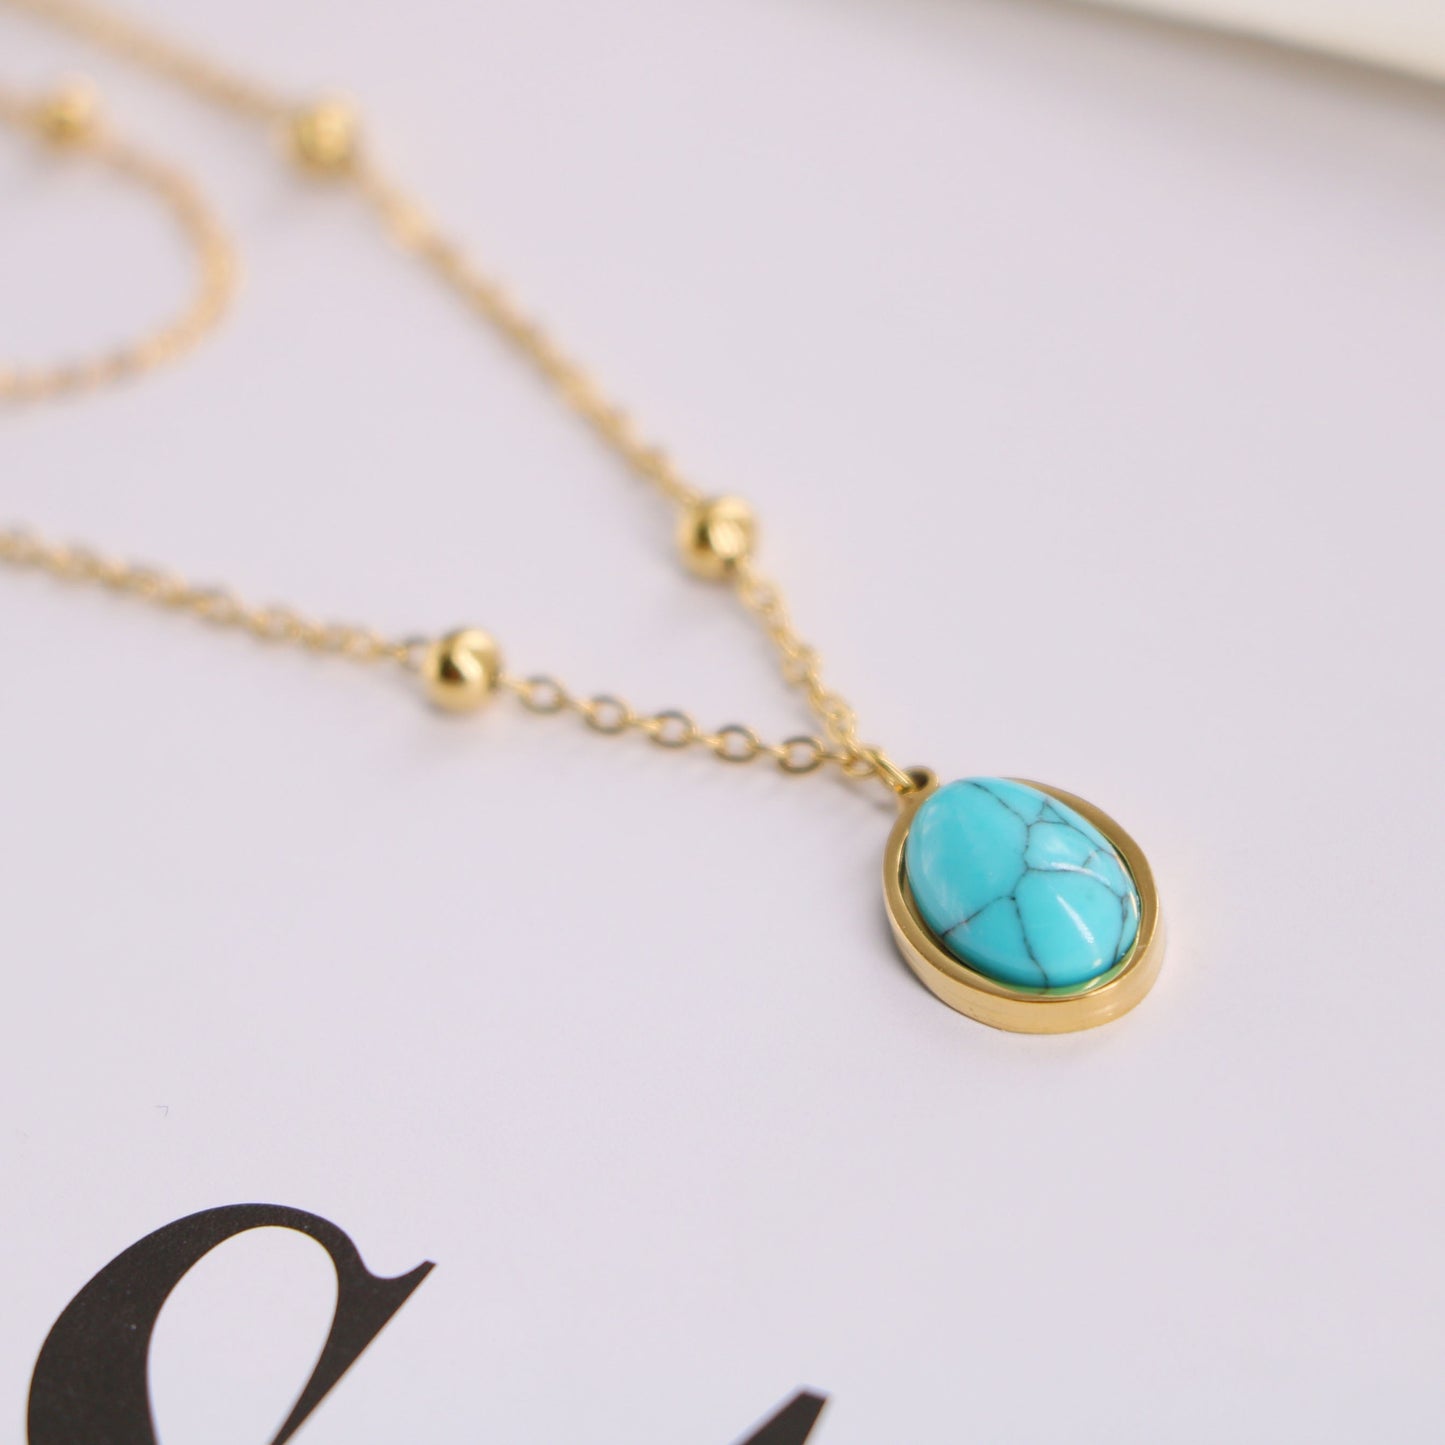 a gold necklace with a turquoise stone on it